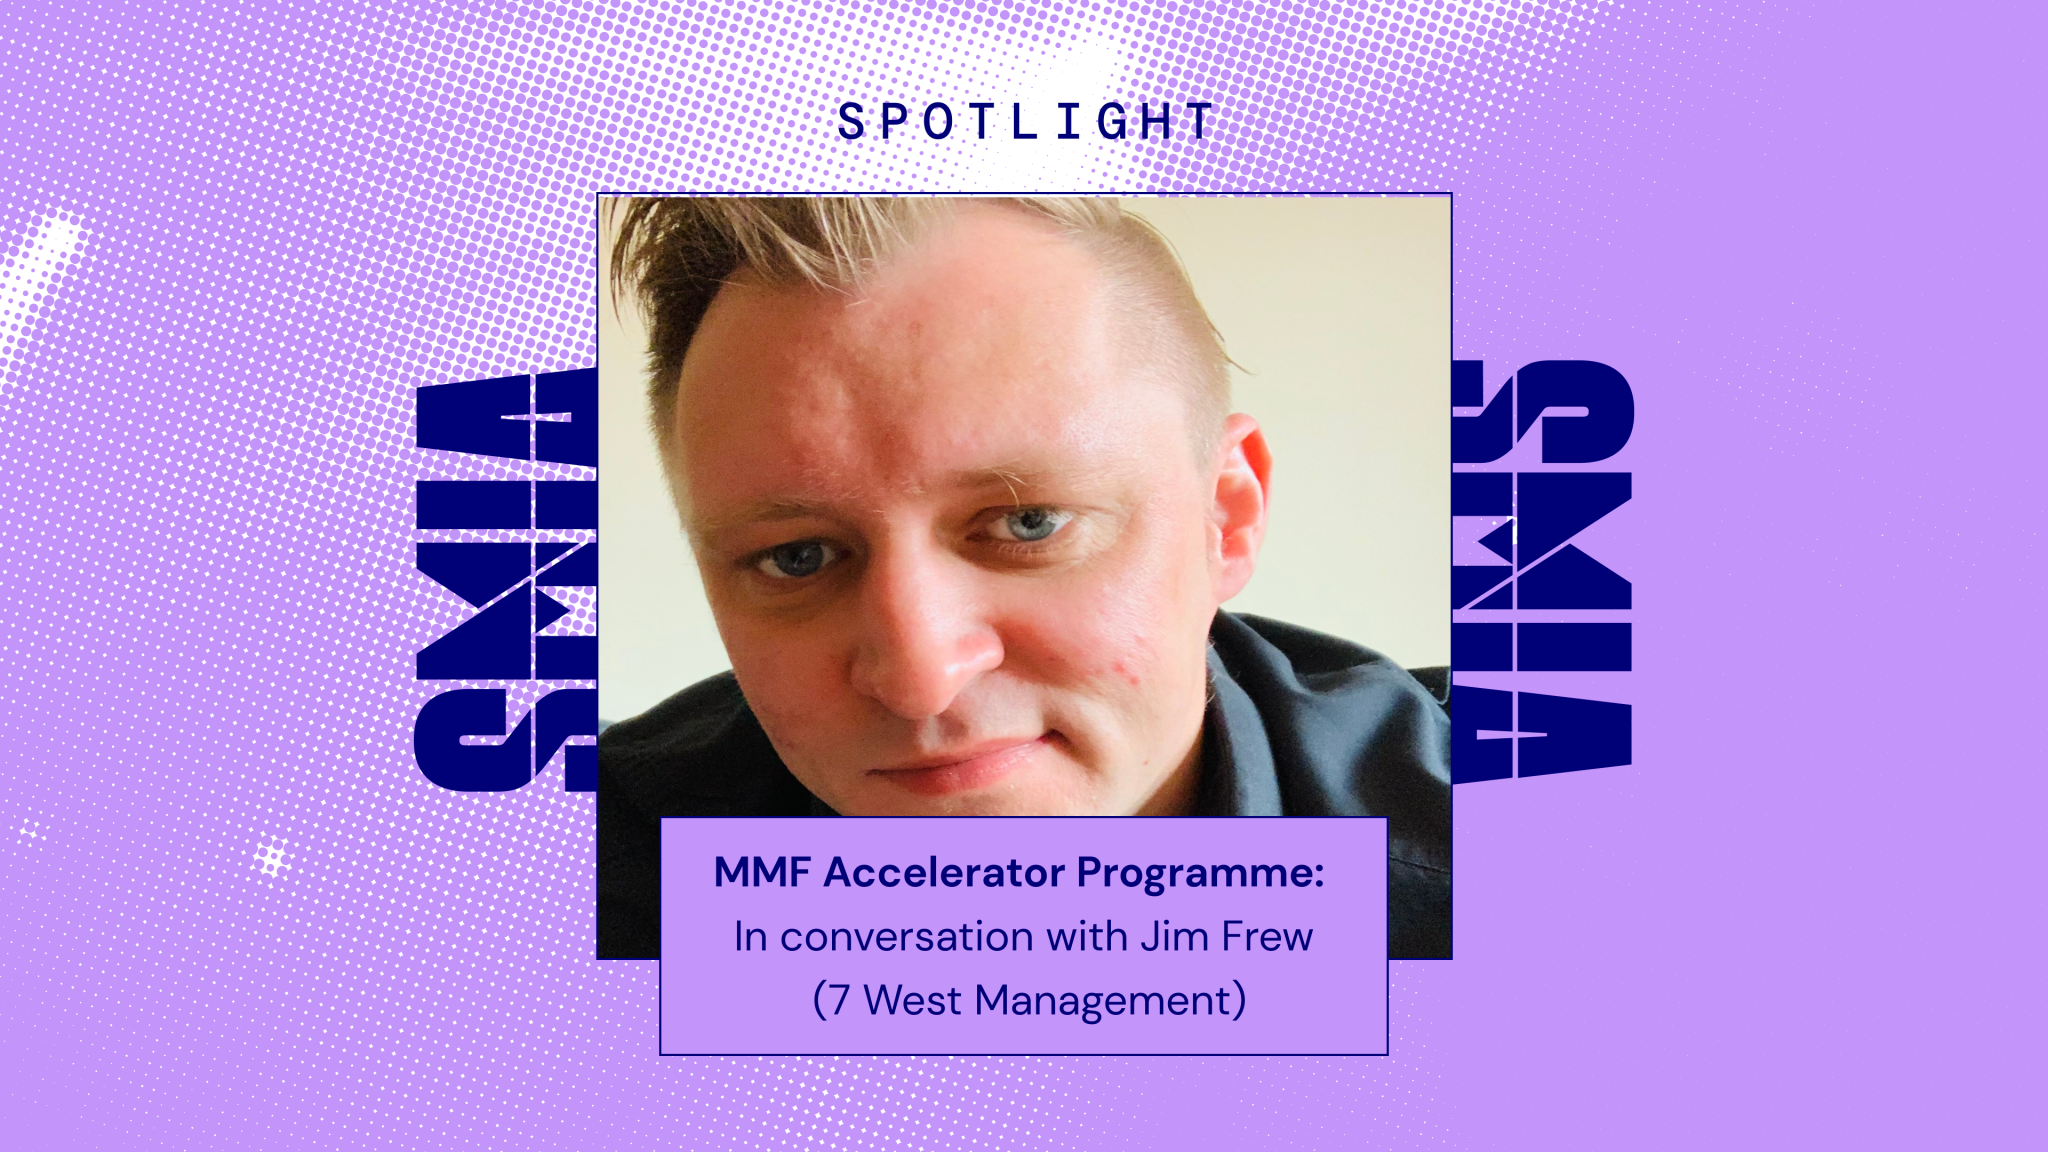 MMF ACCELERATOR PROGRAMME: A CONVERSATION WITH JIM FREW ON NAVIGATING THE MUSIC INDUSTRY